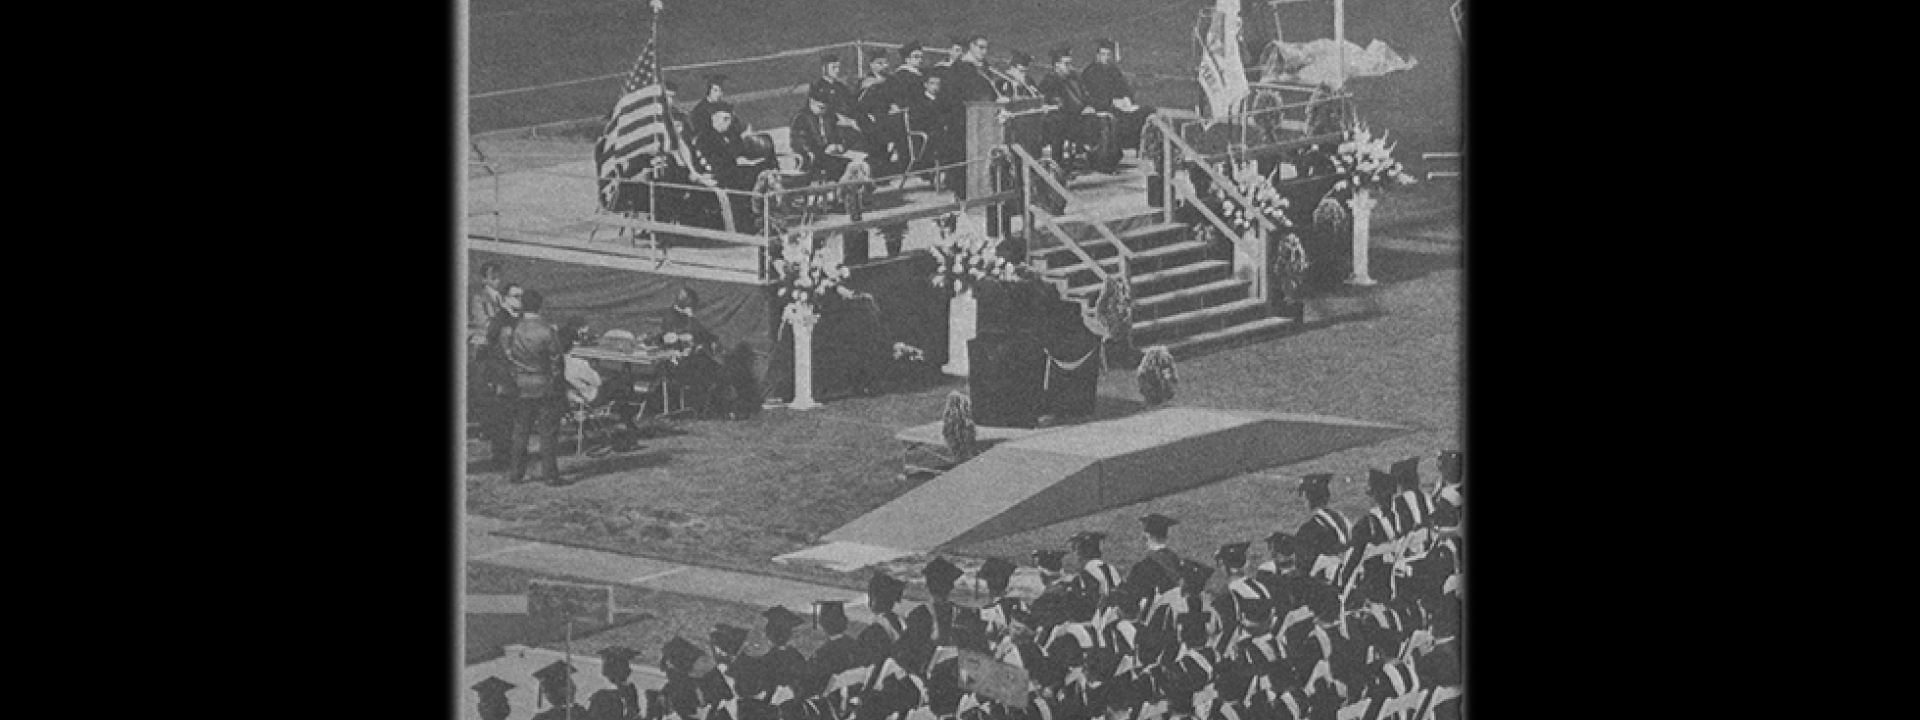 Cal State LA Commencement ceremony during the 1950s